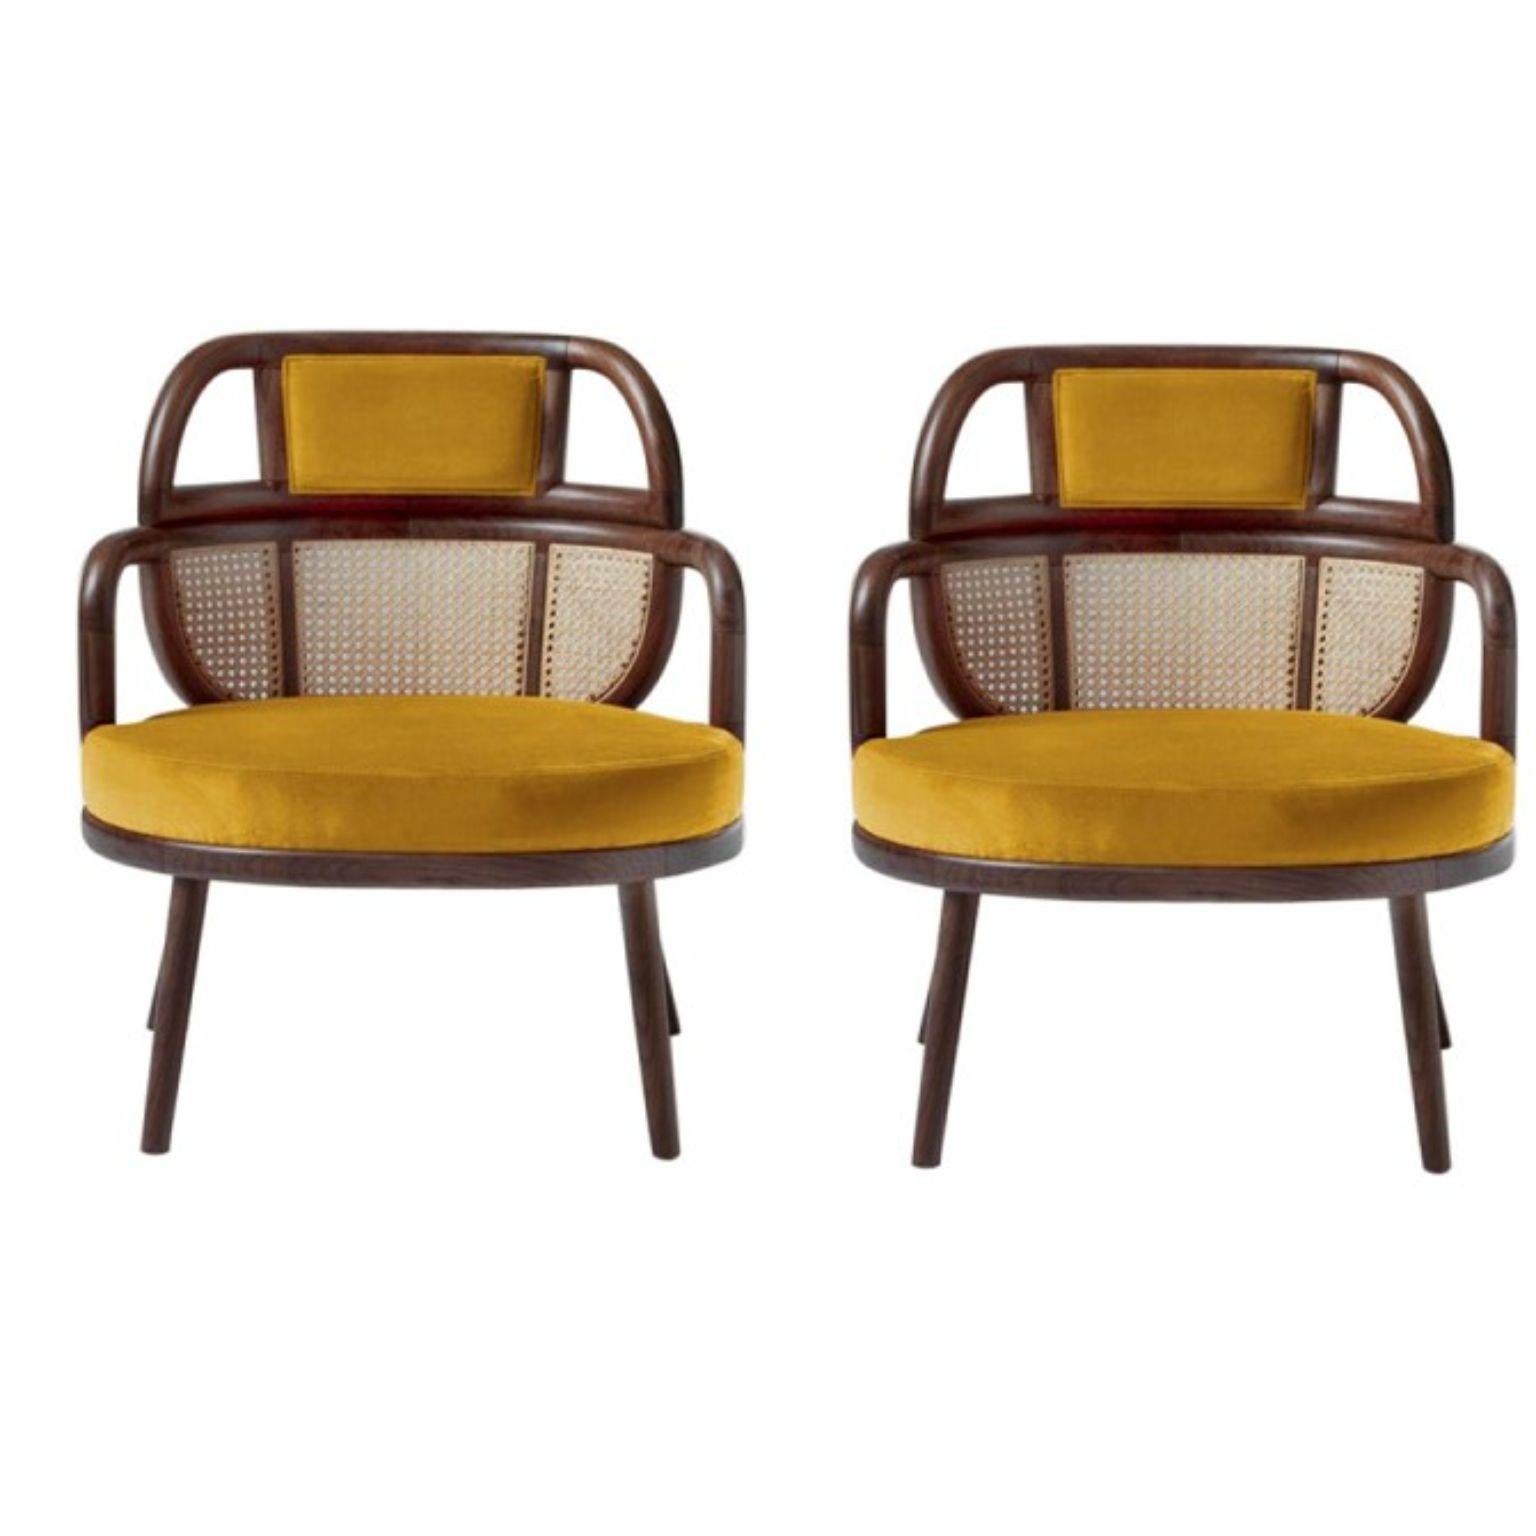 Set of 2 Havana armchairs by Dooq
Measures: W 70 cm 32”
D 62 cm 24”
H 79 cm 32”
seat height: 42 cm 16”

Materials: upholstery fabric or leather; structure solid wood feet lacquered MDF or solid wood rattan natural rattan. COM with natural